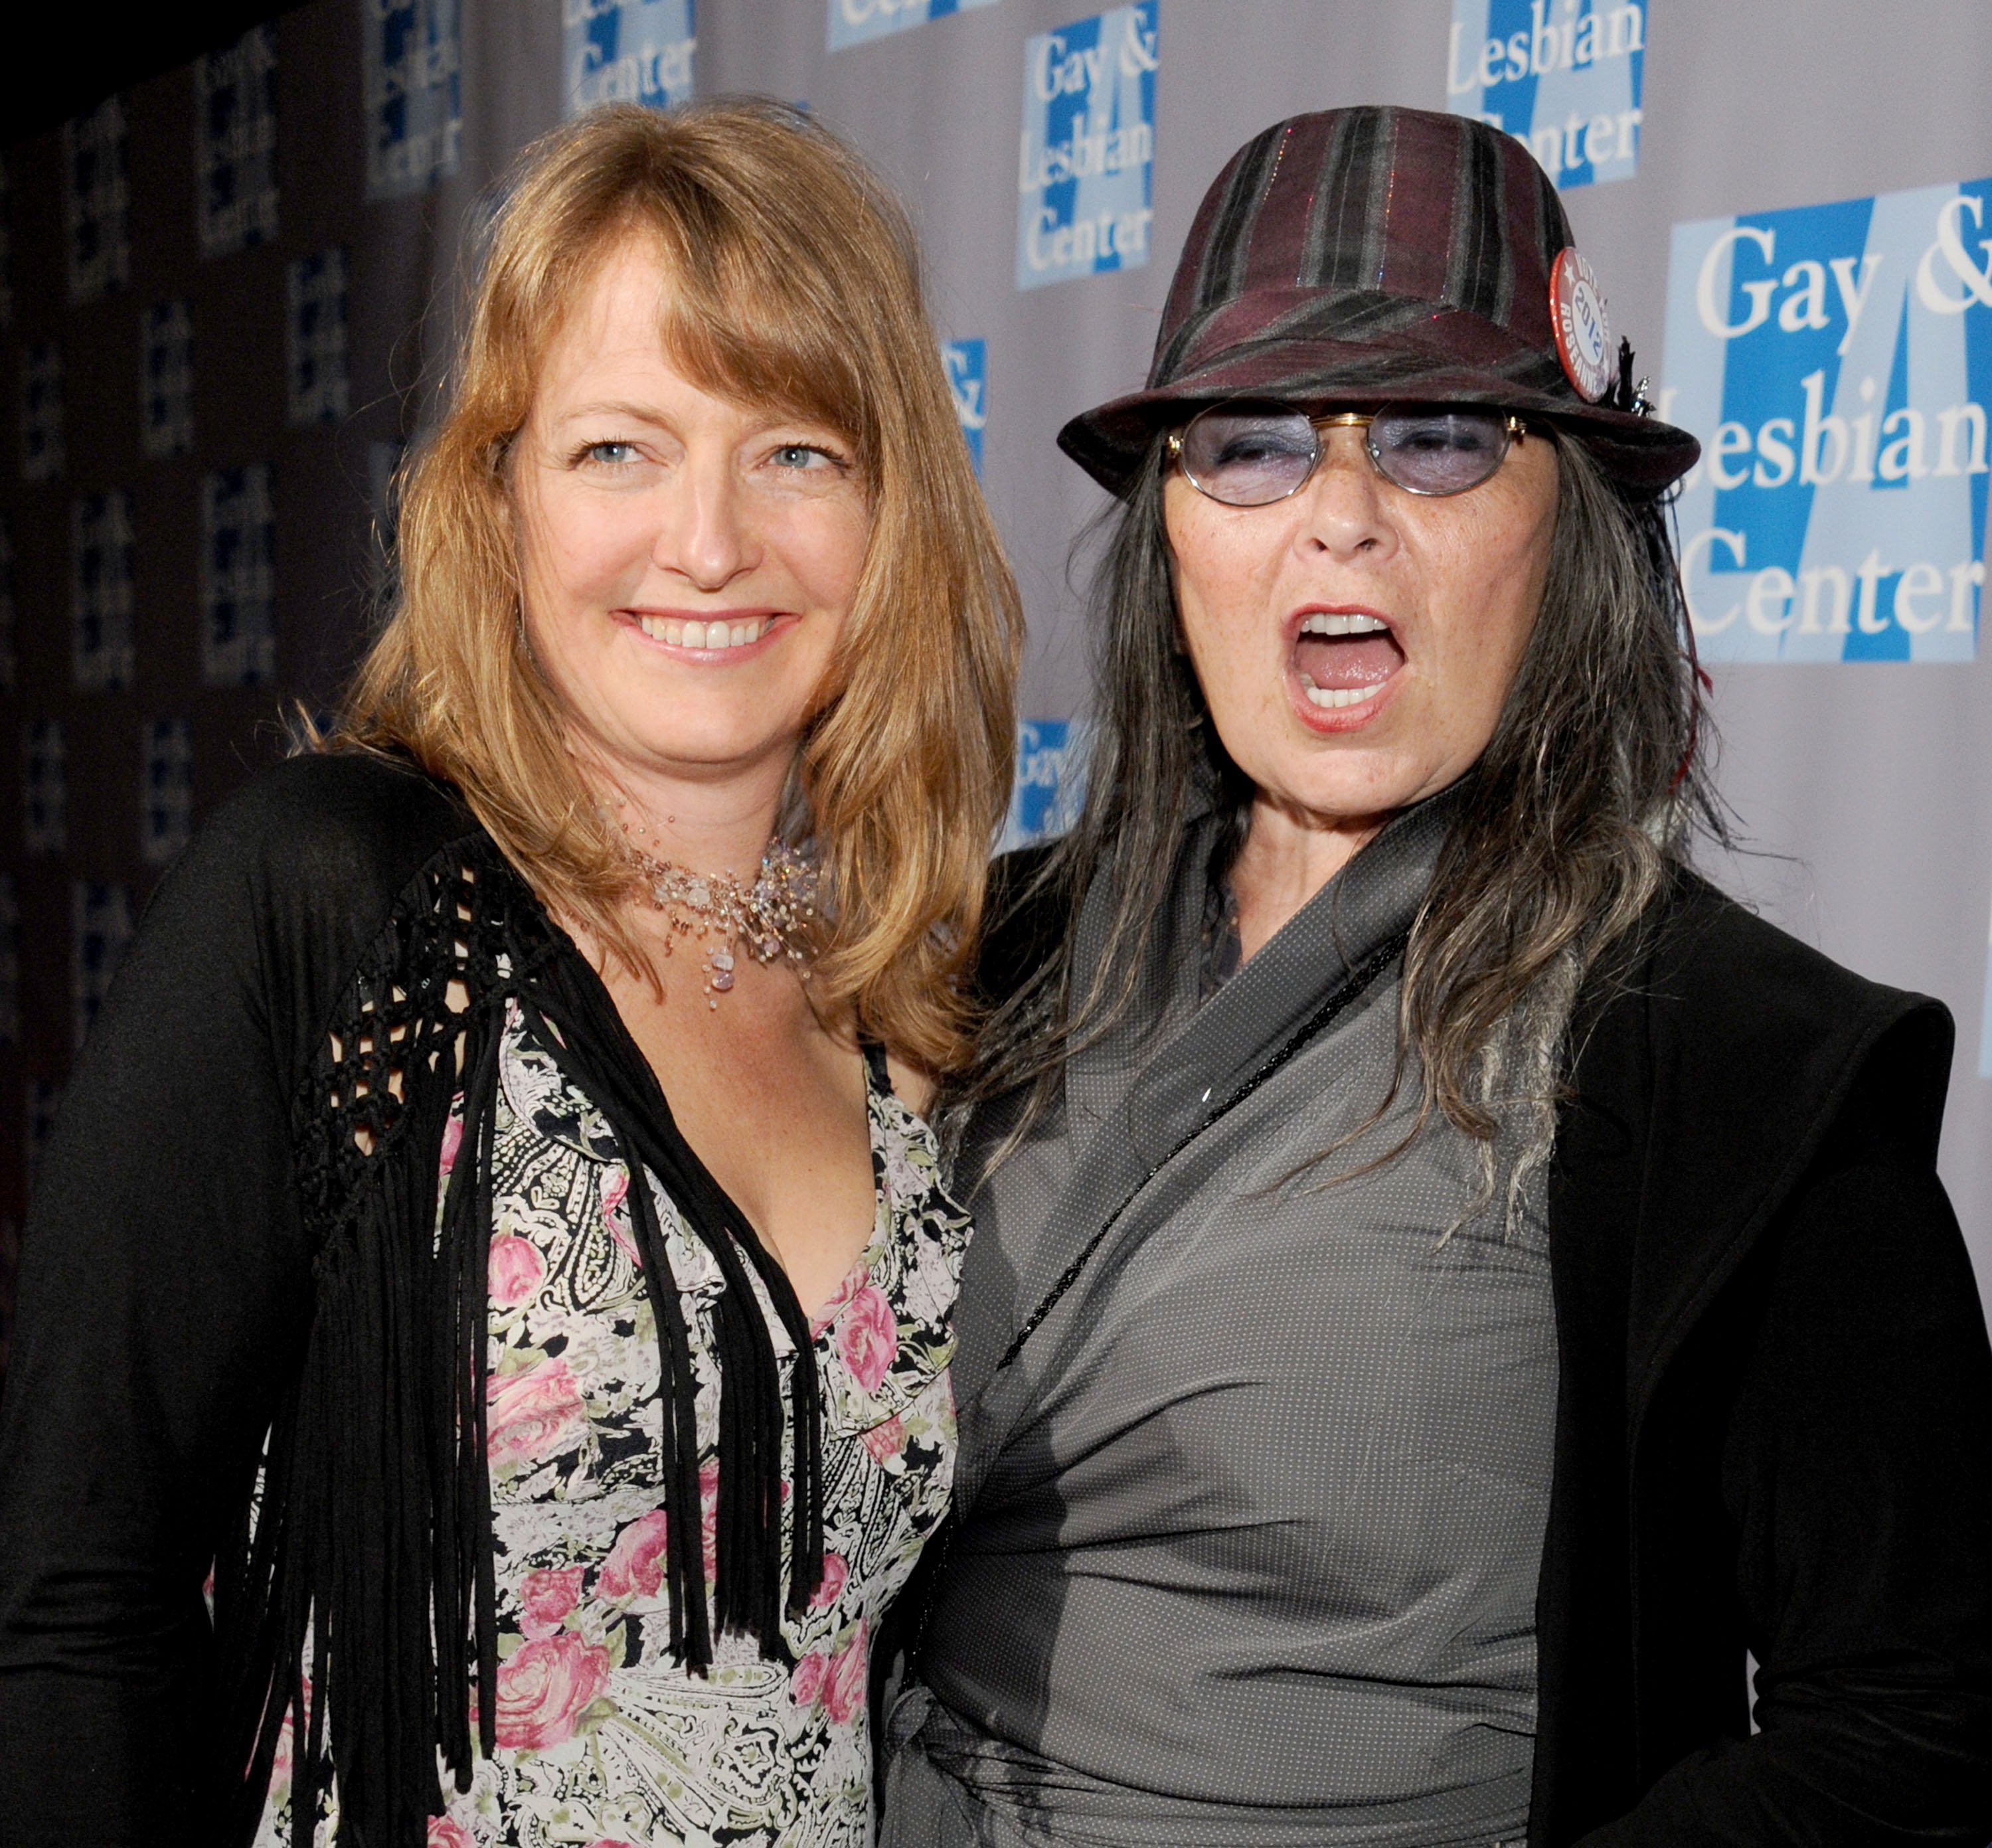 Actress Roseanne and daughter Brandi Brown arrive at the L.A. Gay & Lesbian Center's "An Evening With Women" at The Beverly Hilton Hotel on May 19, 2012 in Beverly Hills, California | Photo: Getty Images